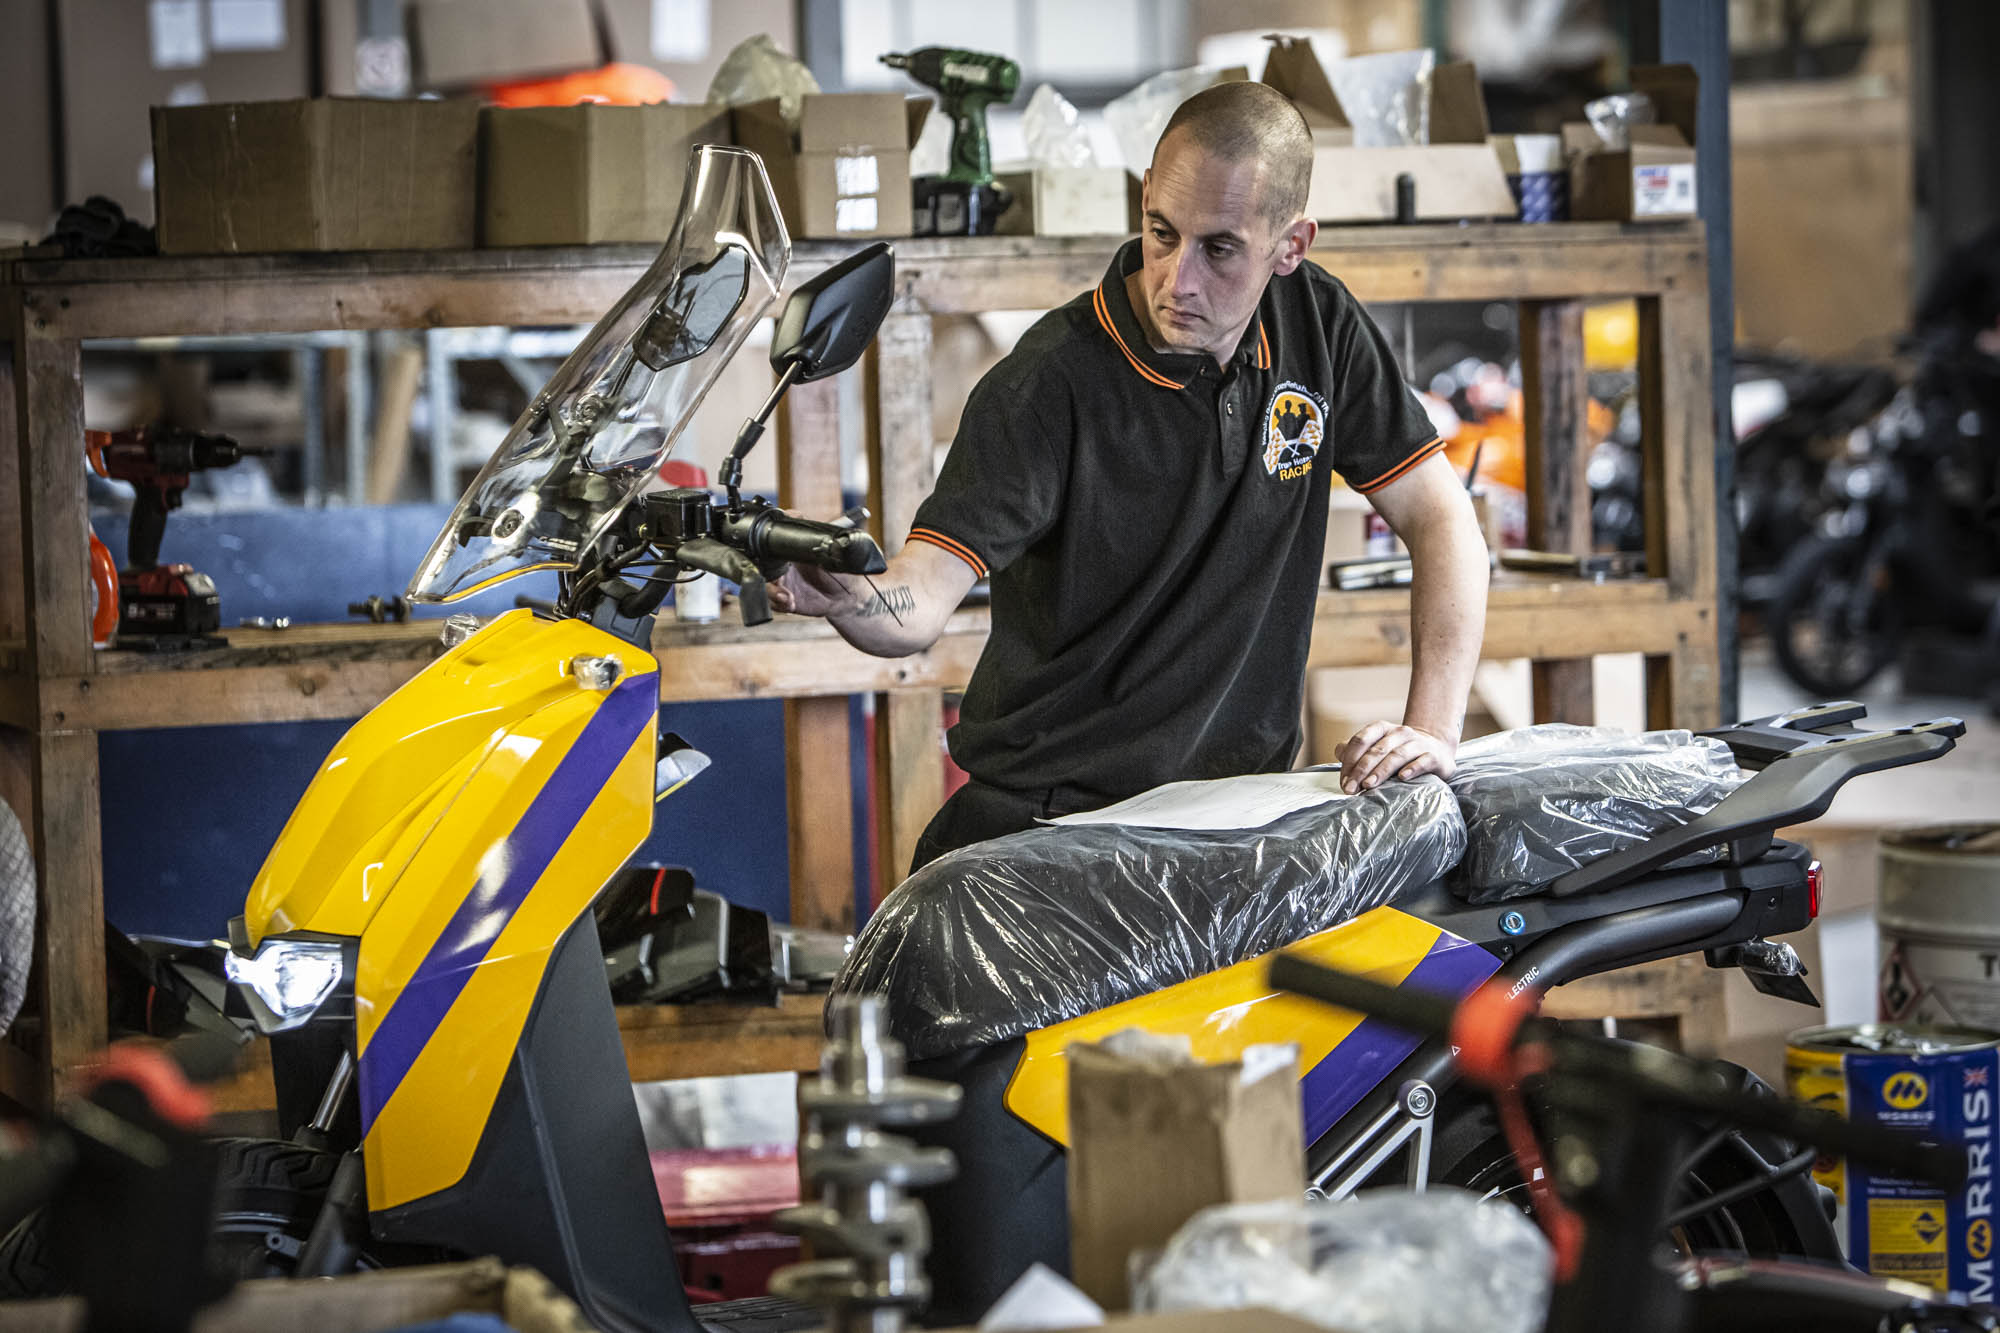 Super Soco CPx Getir Delivery scooters being maintained by GreenMo UK